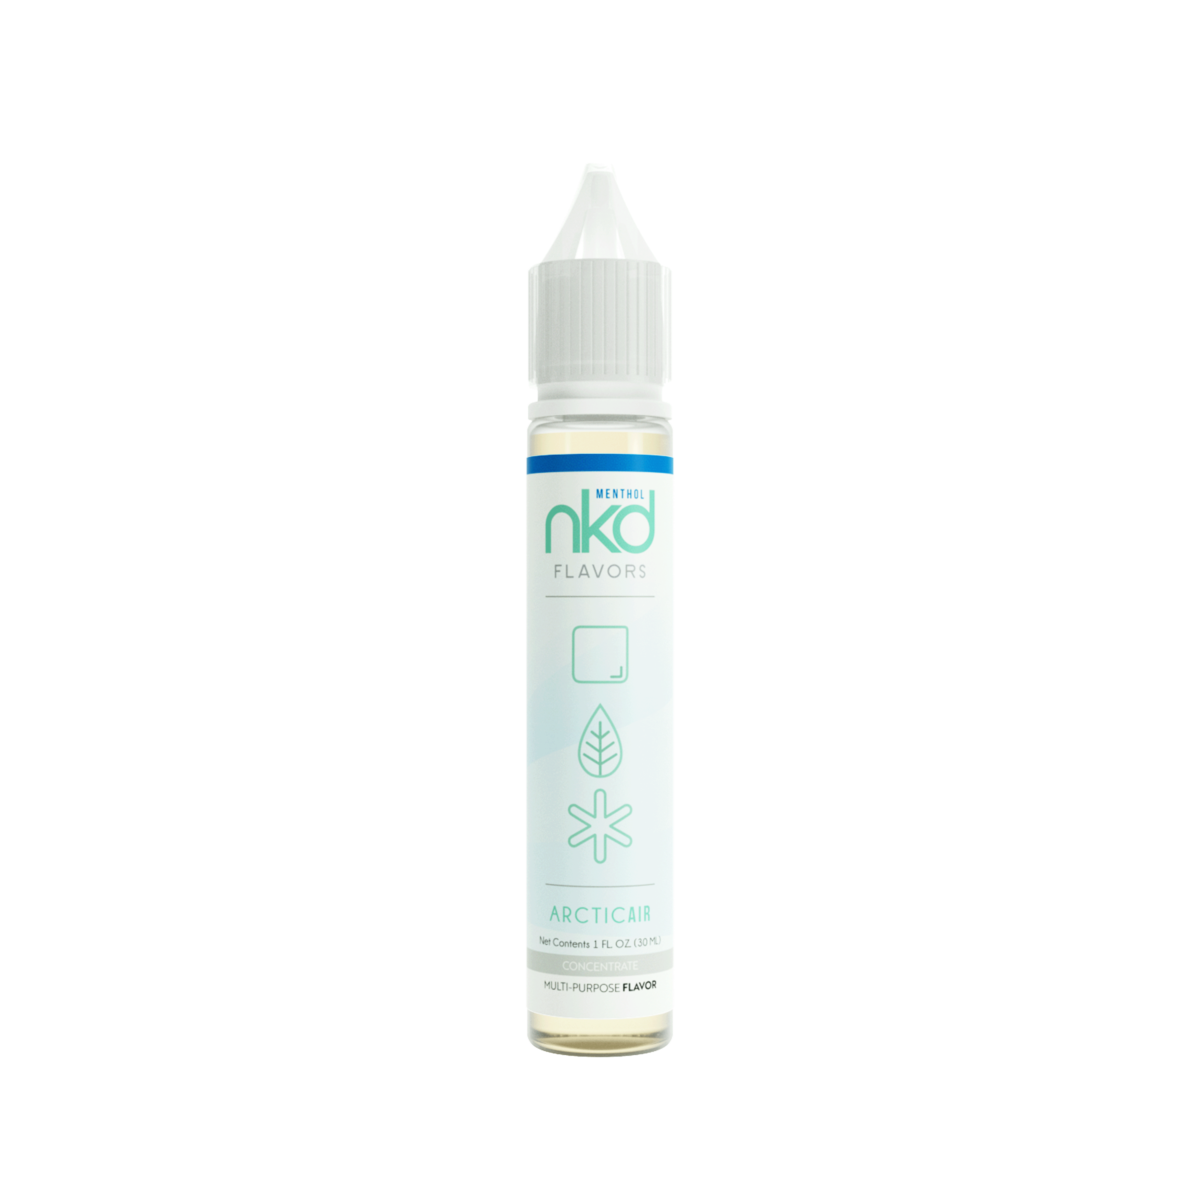 NKD Flavor Concentrate 30mL Artic Air Bottle